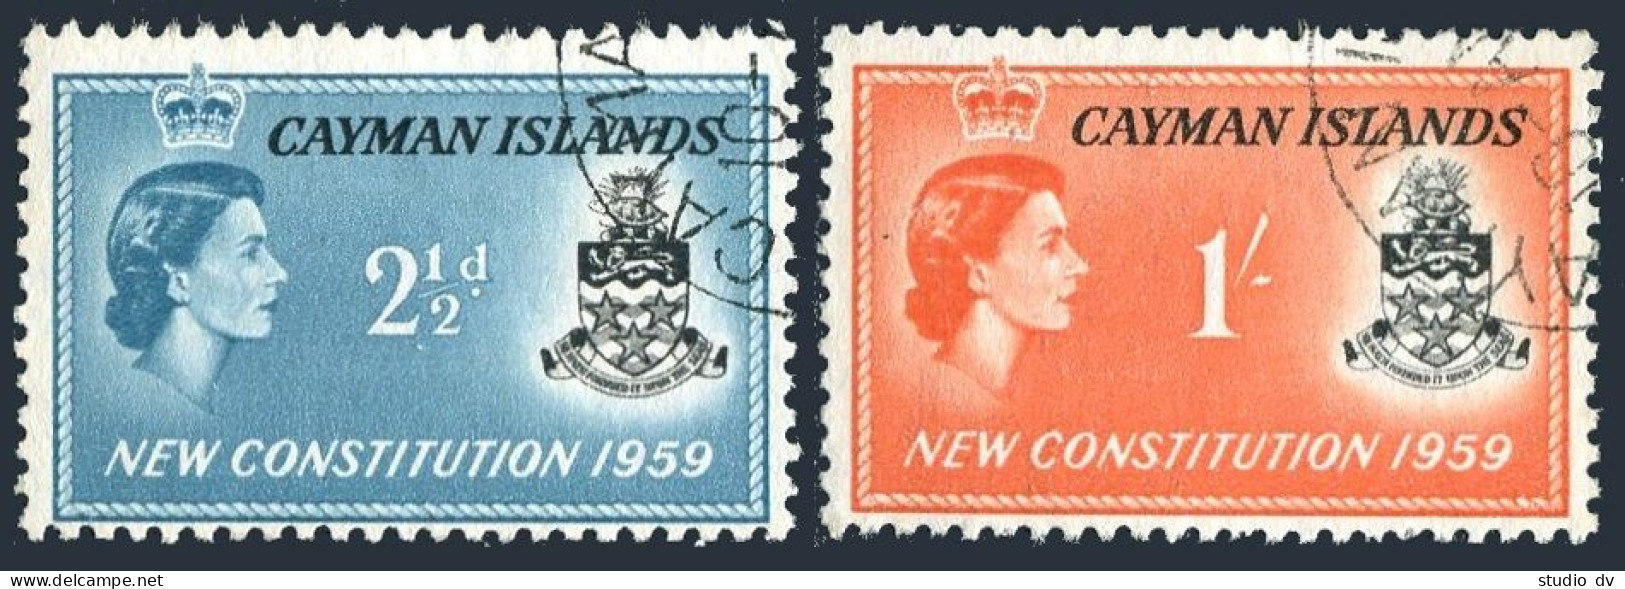 Cayman 151-152, Used. Michel 152-153. New Constitution 1959. QE II, Arms. - Kaaiman Eilanden